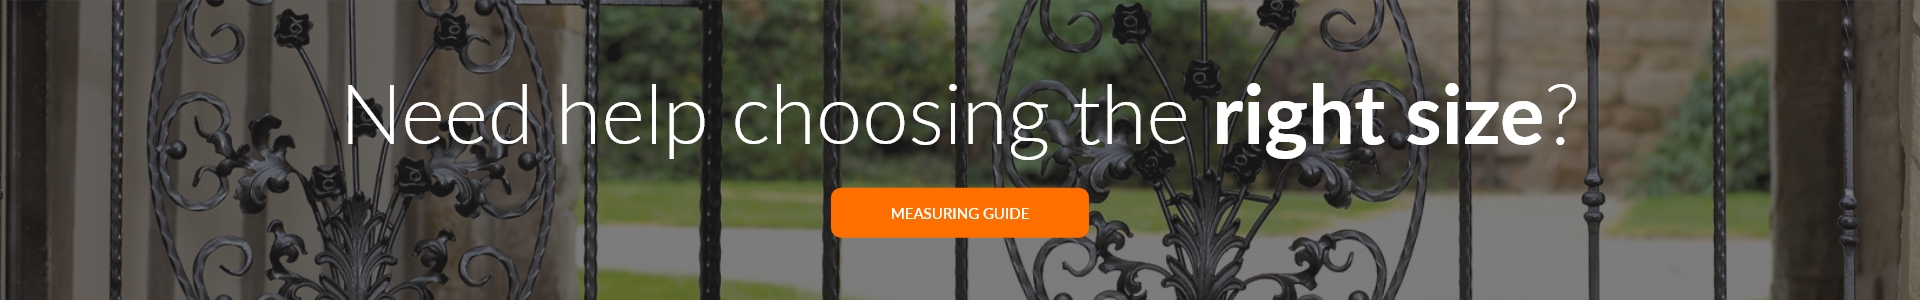 View the gate measuring guide here